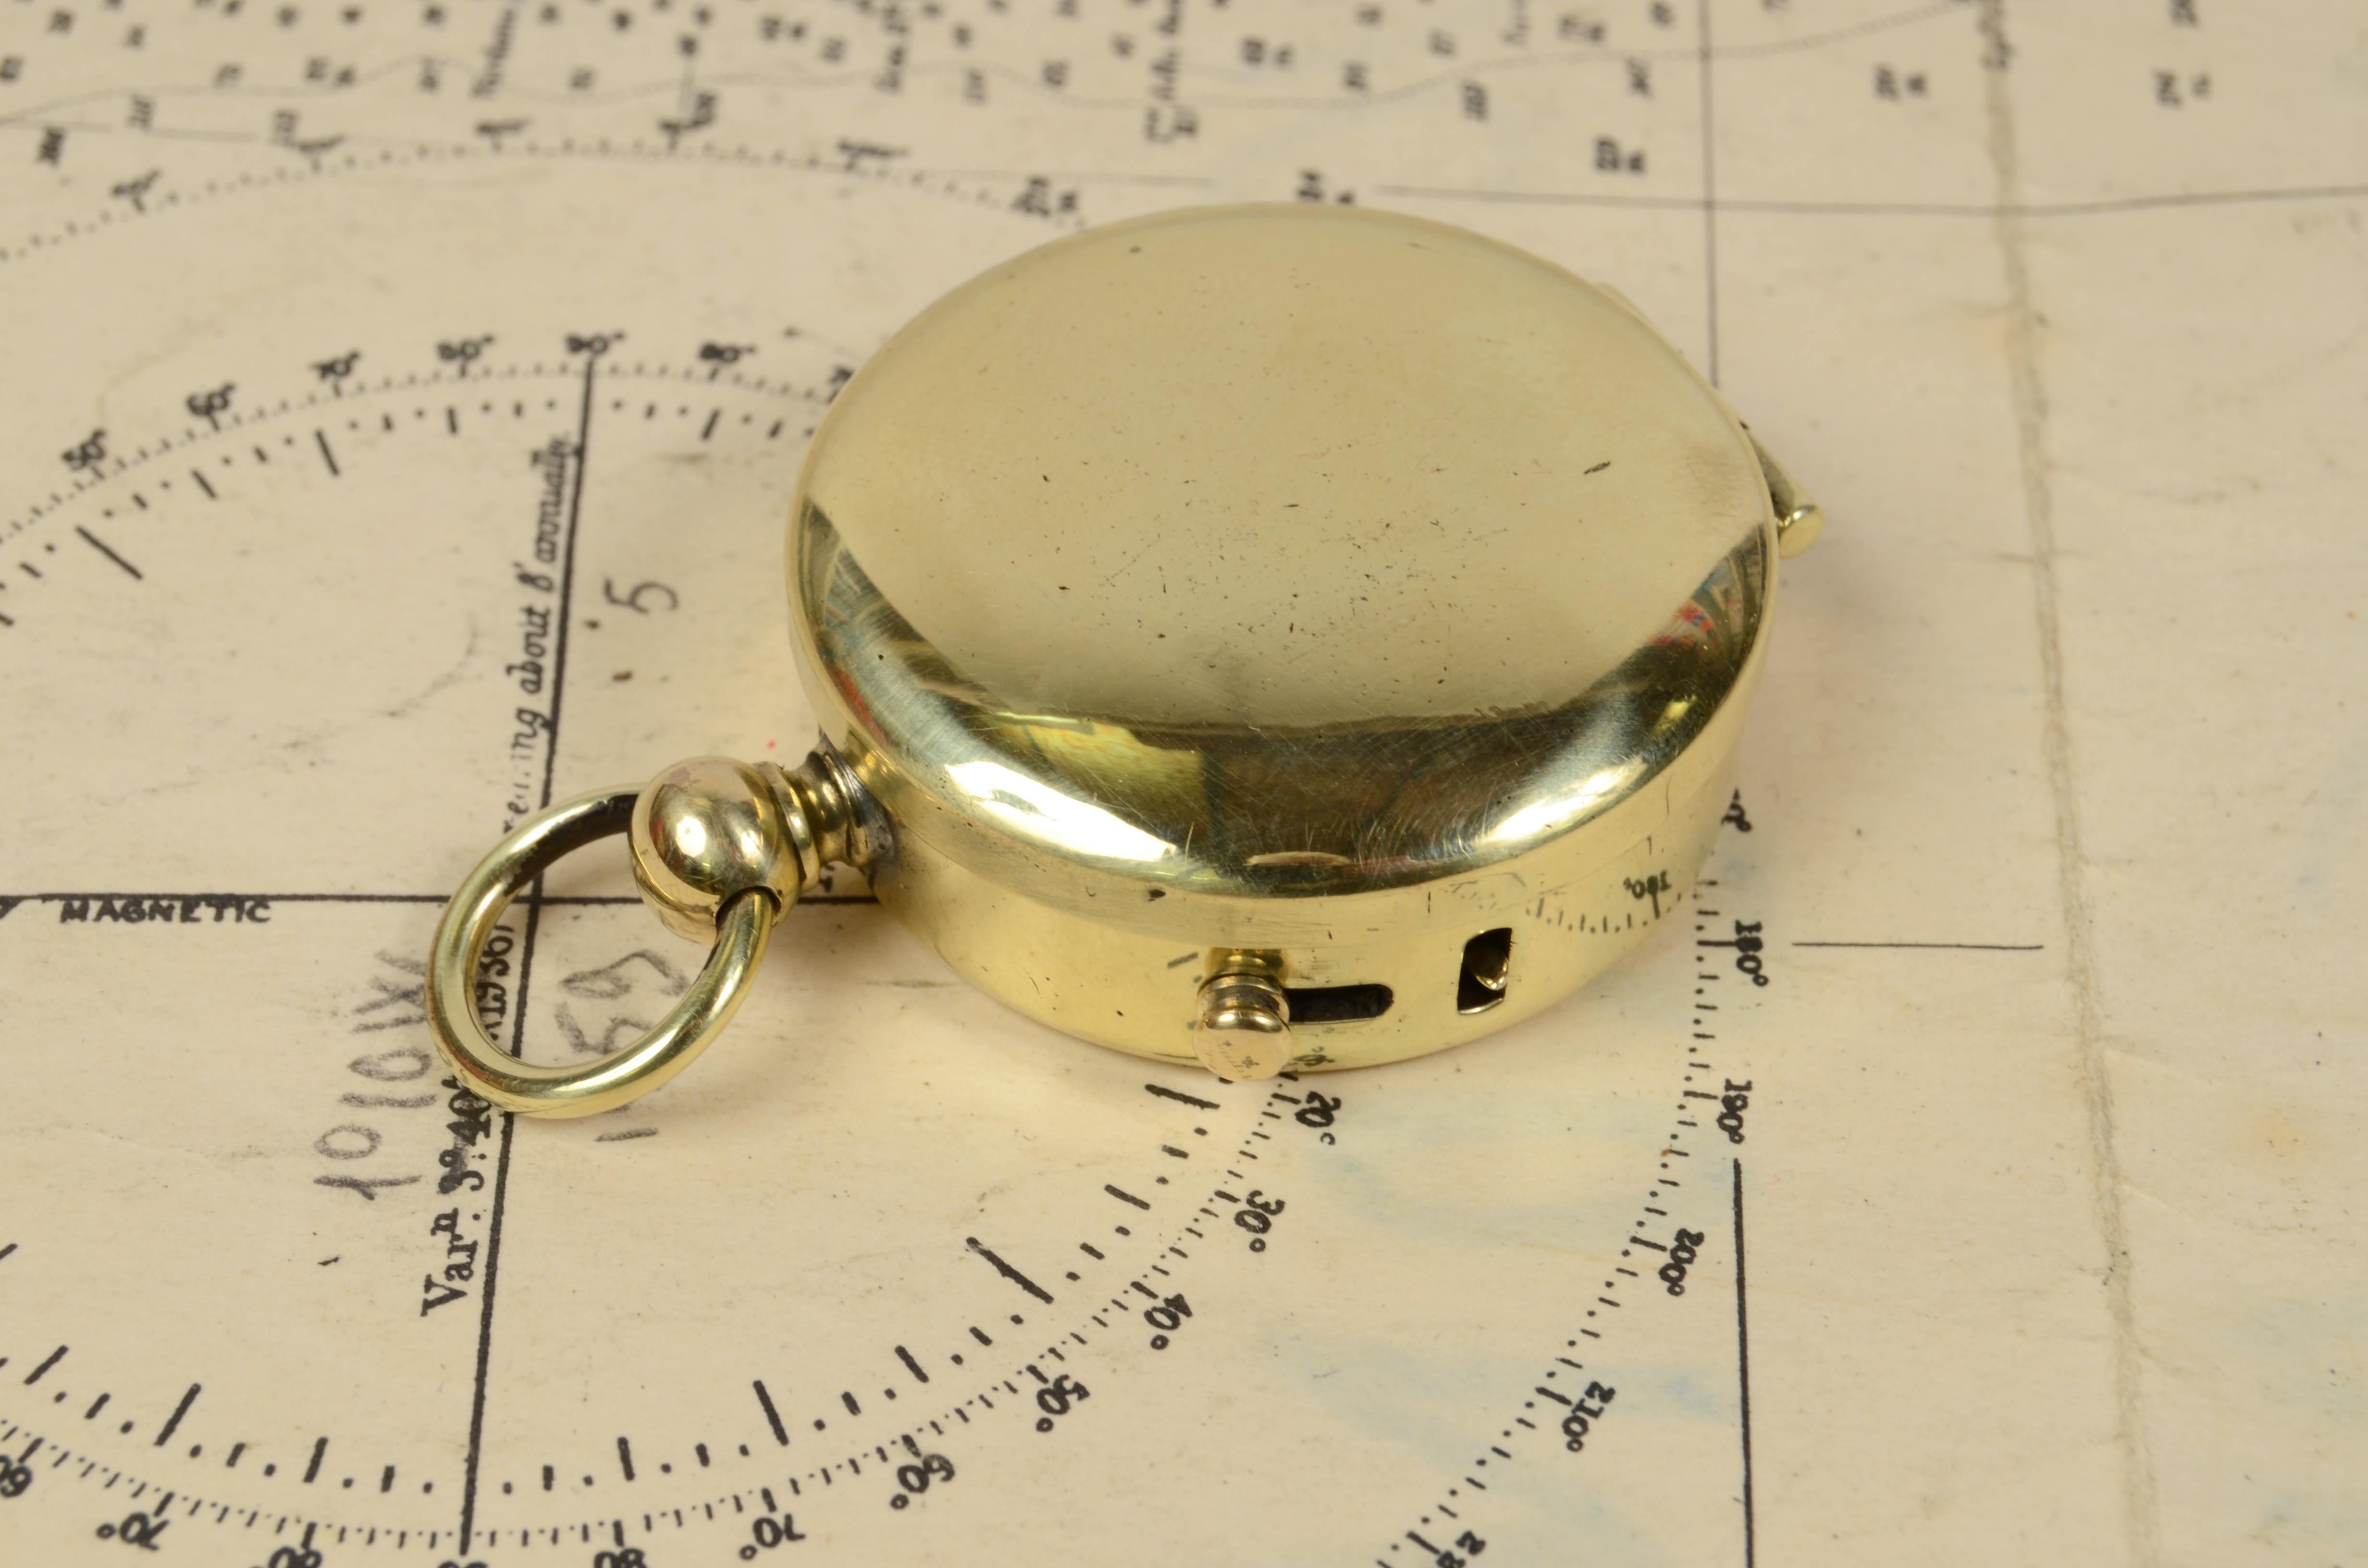 1920s Nautical English Magnetic Brass Compass Antique Marine Navigation Tool 5